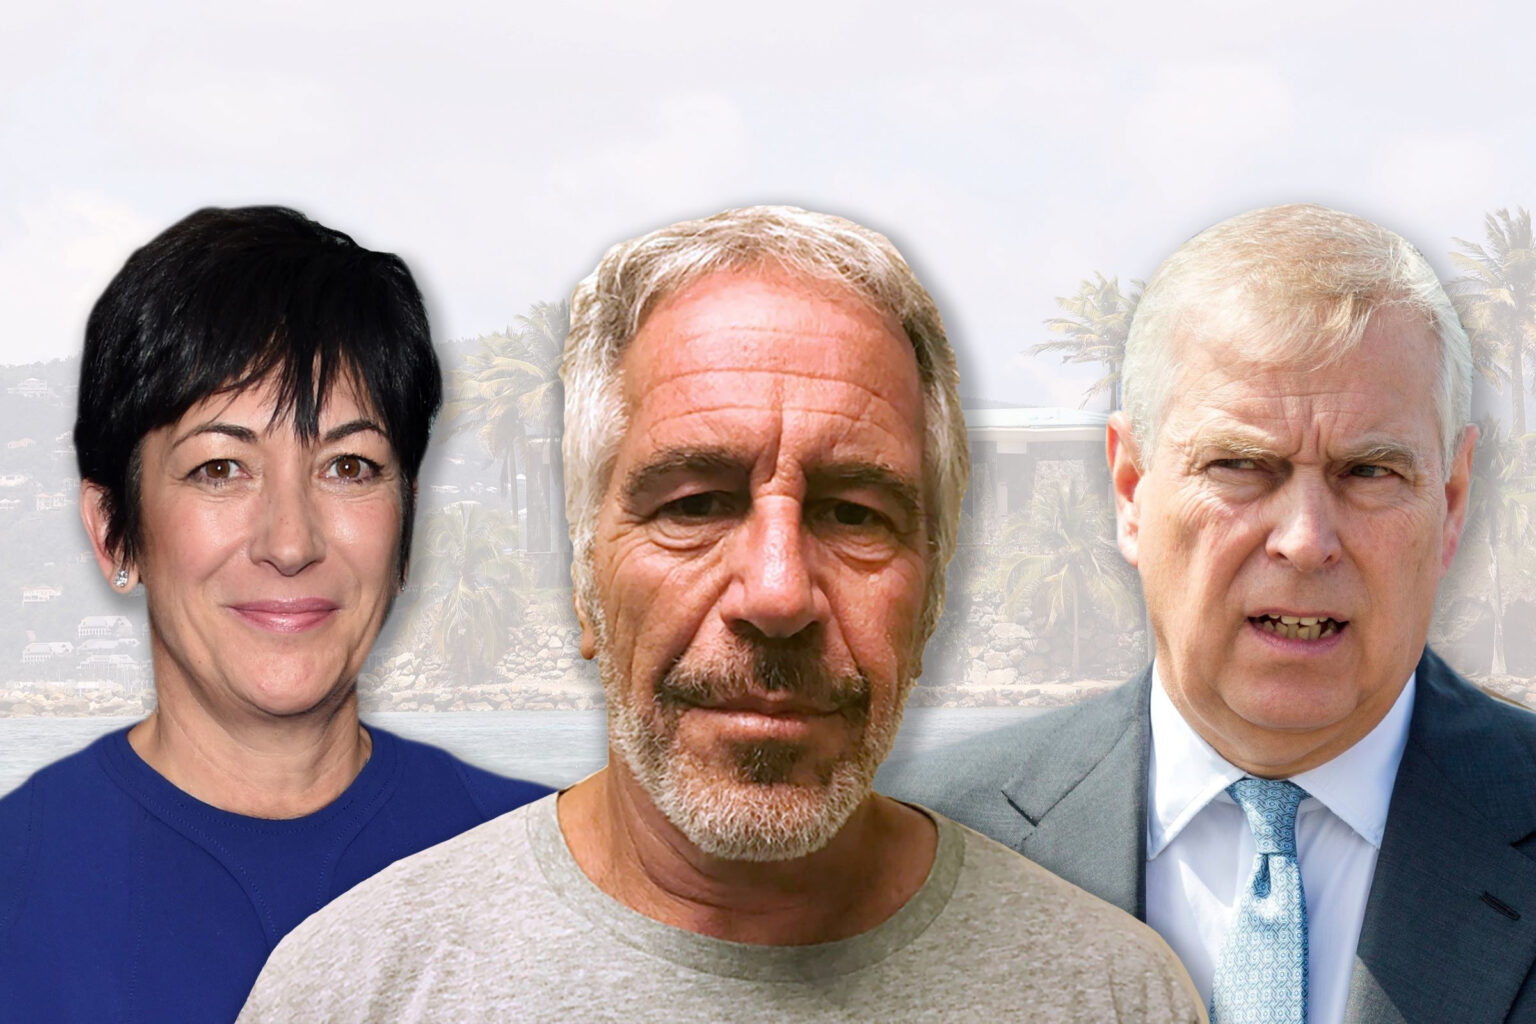 Speculation buzzed about whether Ghislaine Maxwell was going to rat on Jeffrey Epstein and his old contacts. Is Maxwell making a deal?